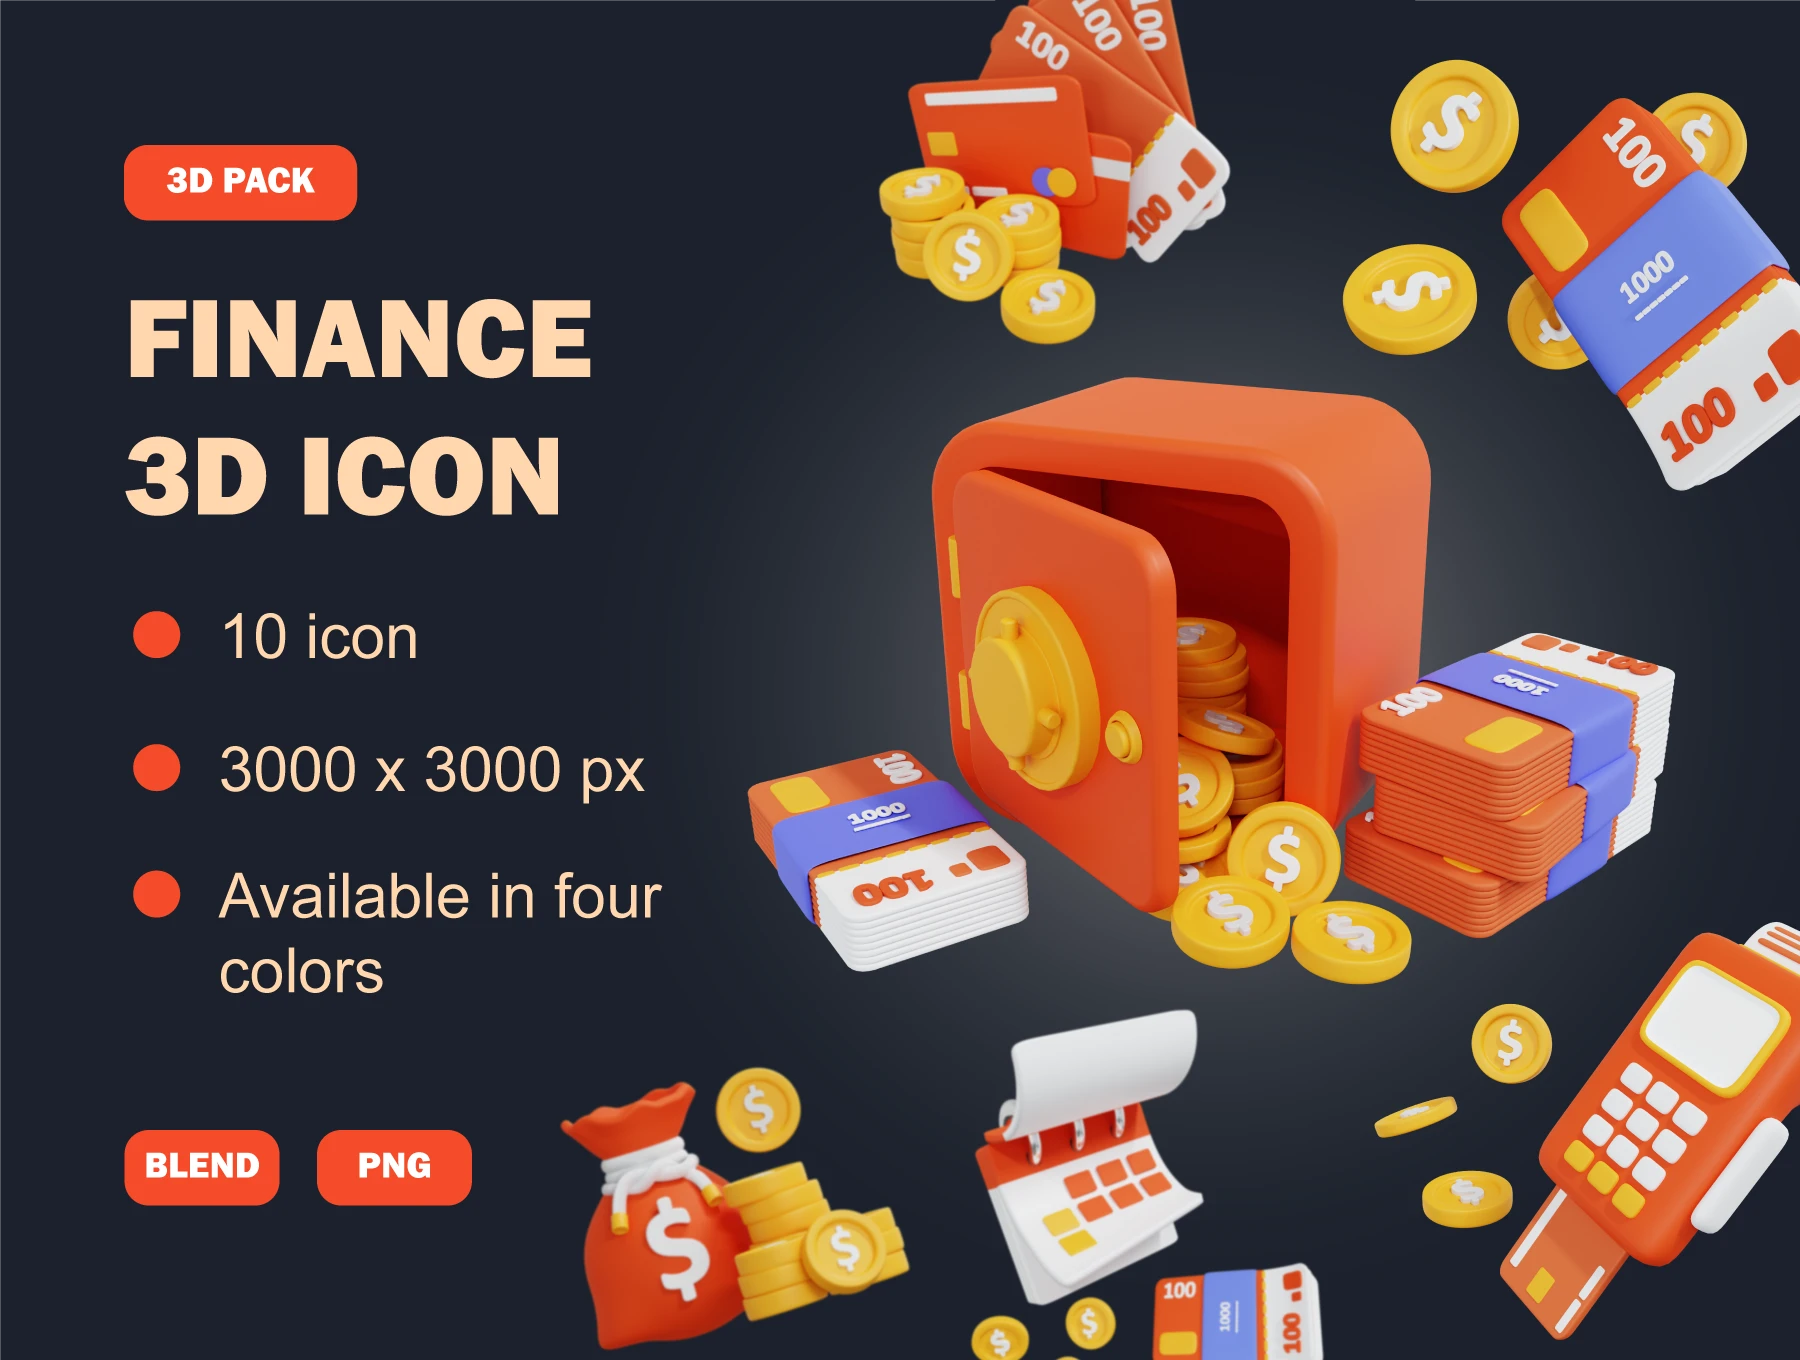 Finance 3D Icon for Figma and Adobe XD